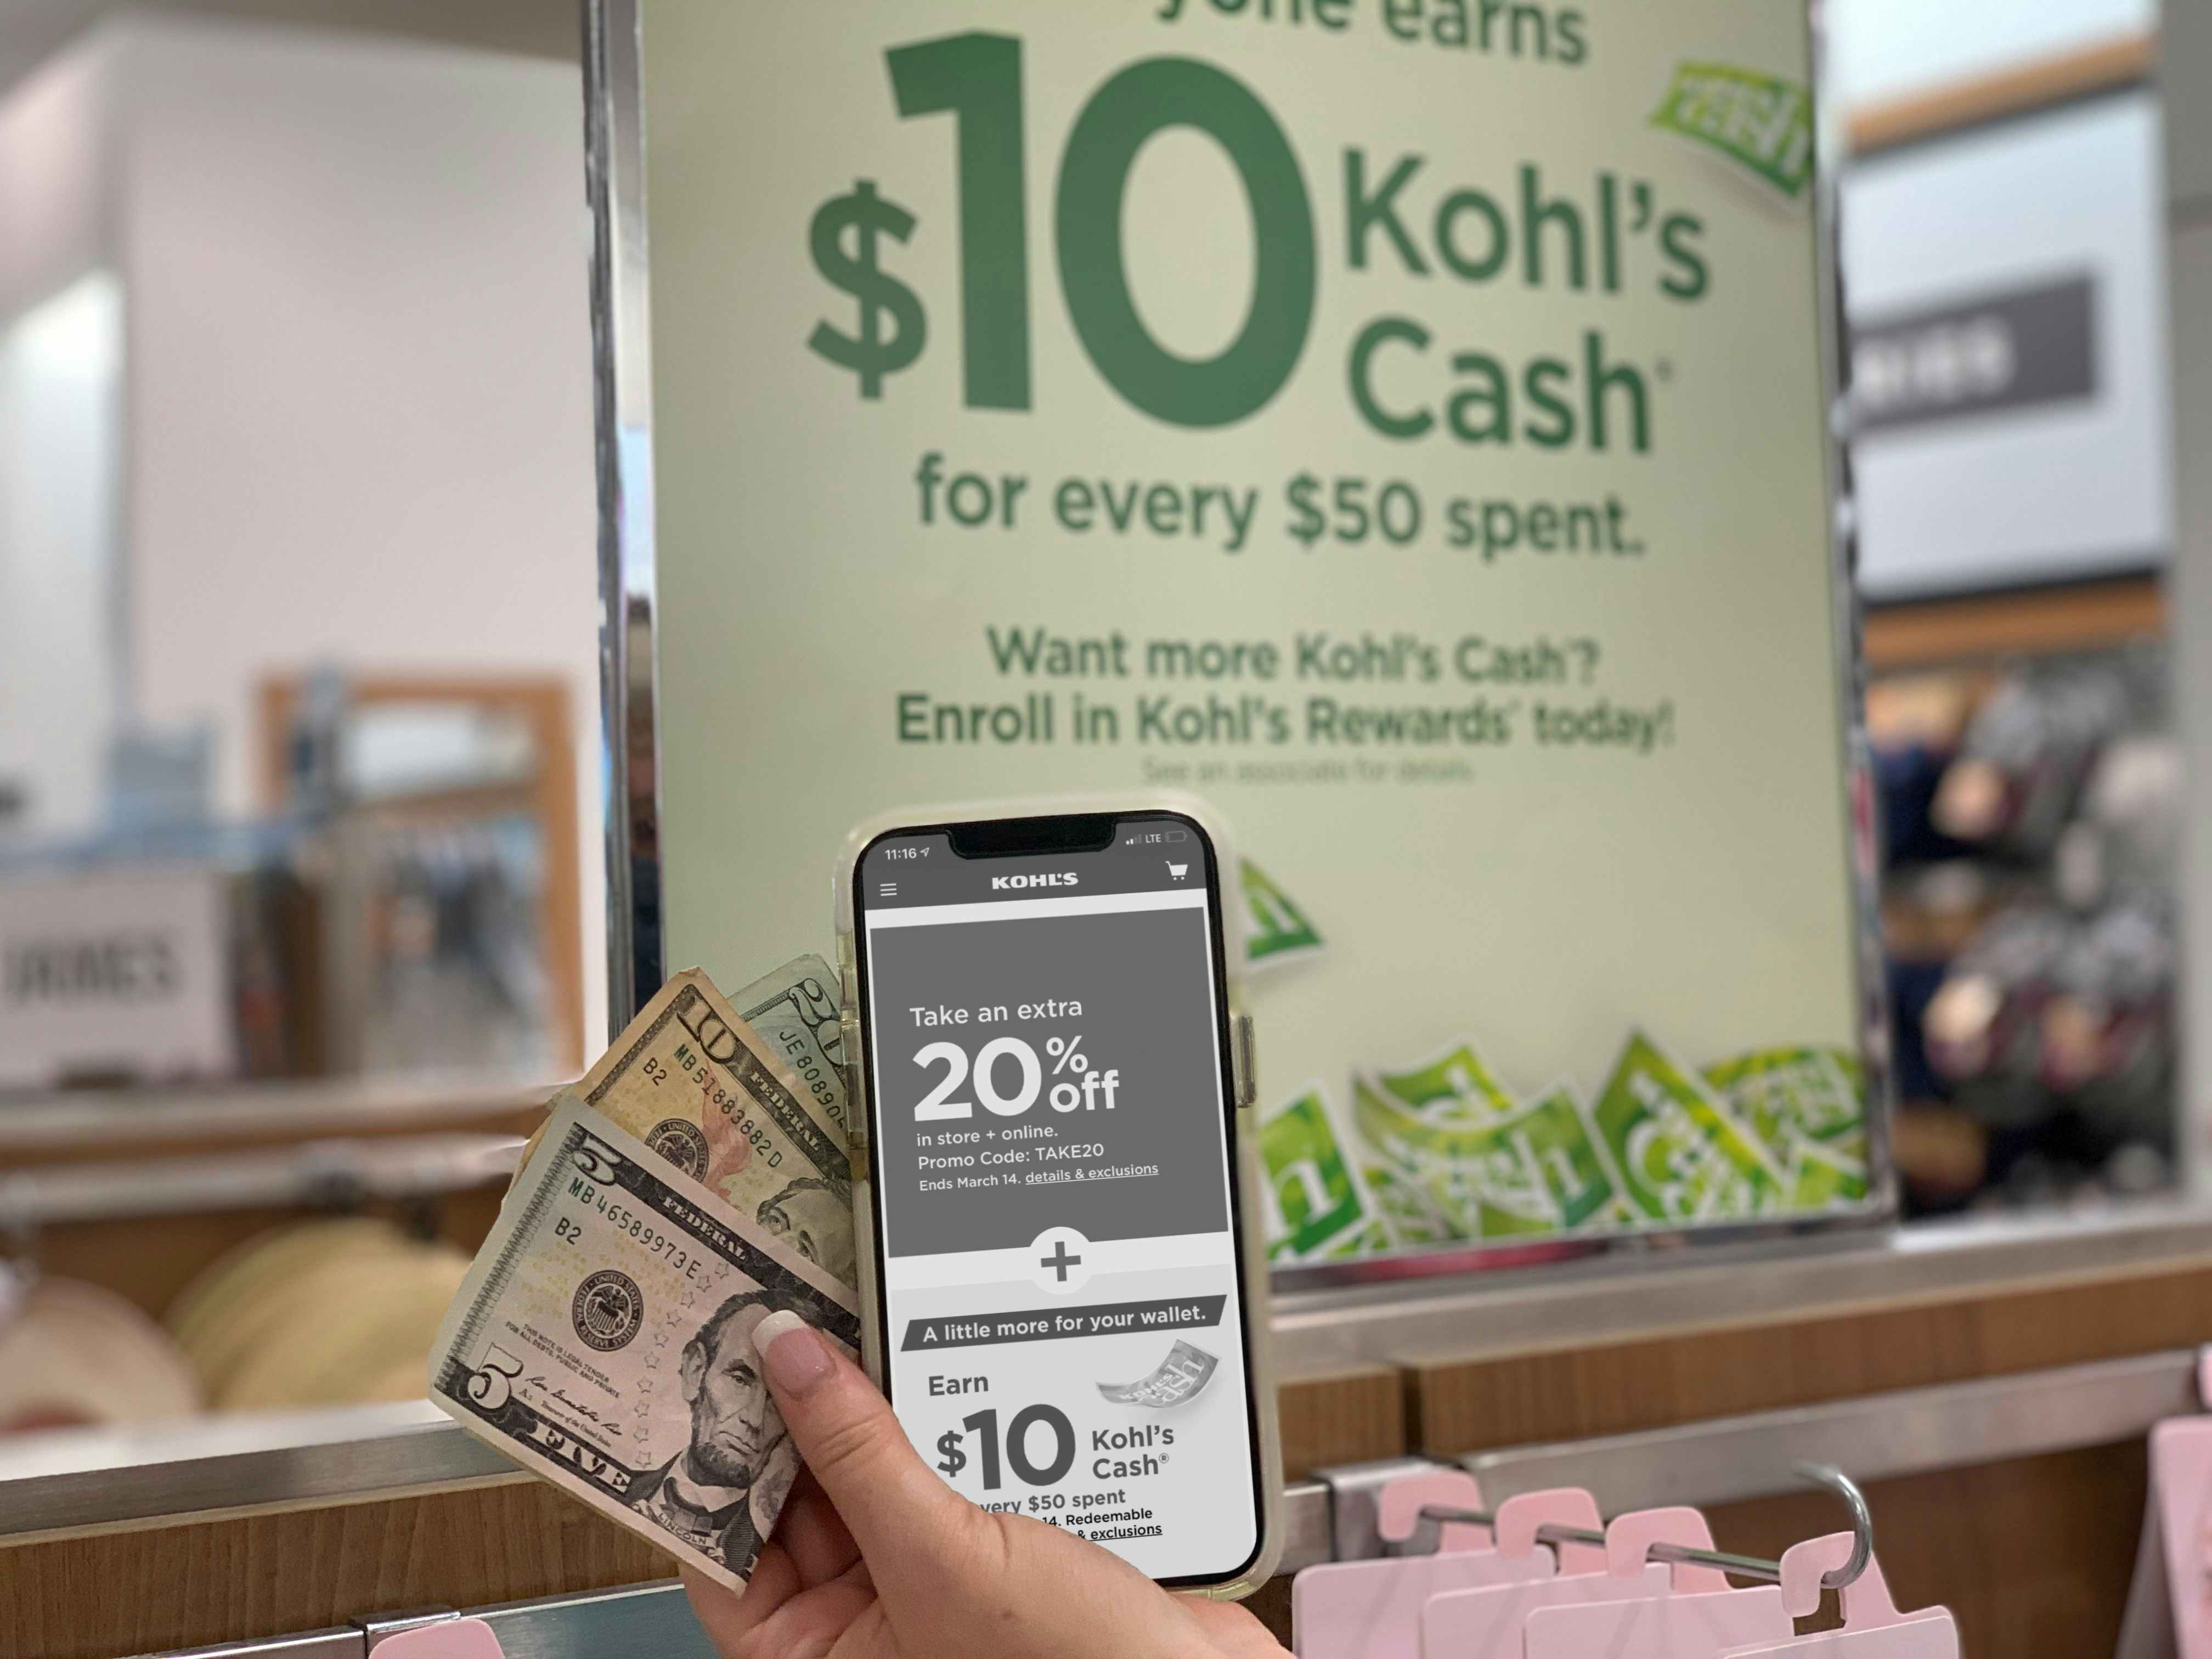 Woman holding money and cellphone with kohls cash app coupons in front of instore sign about kohls cash